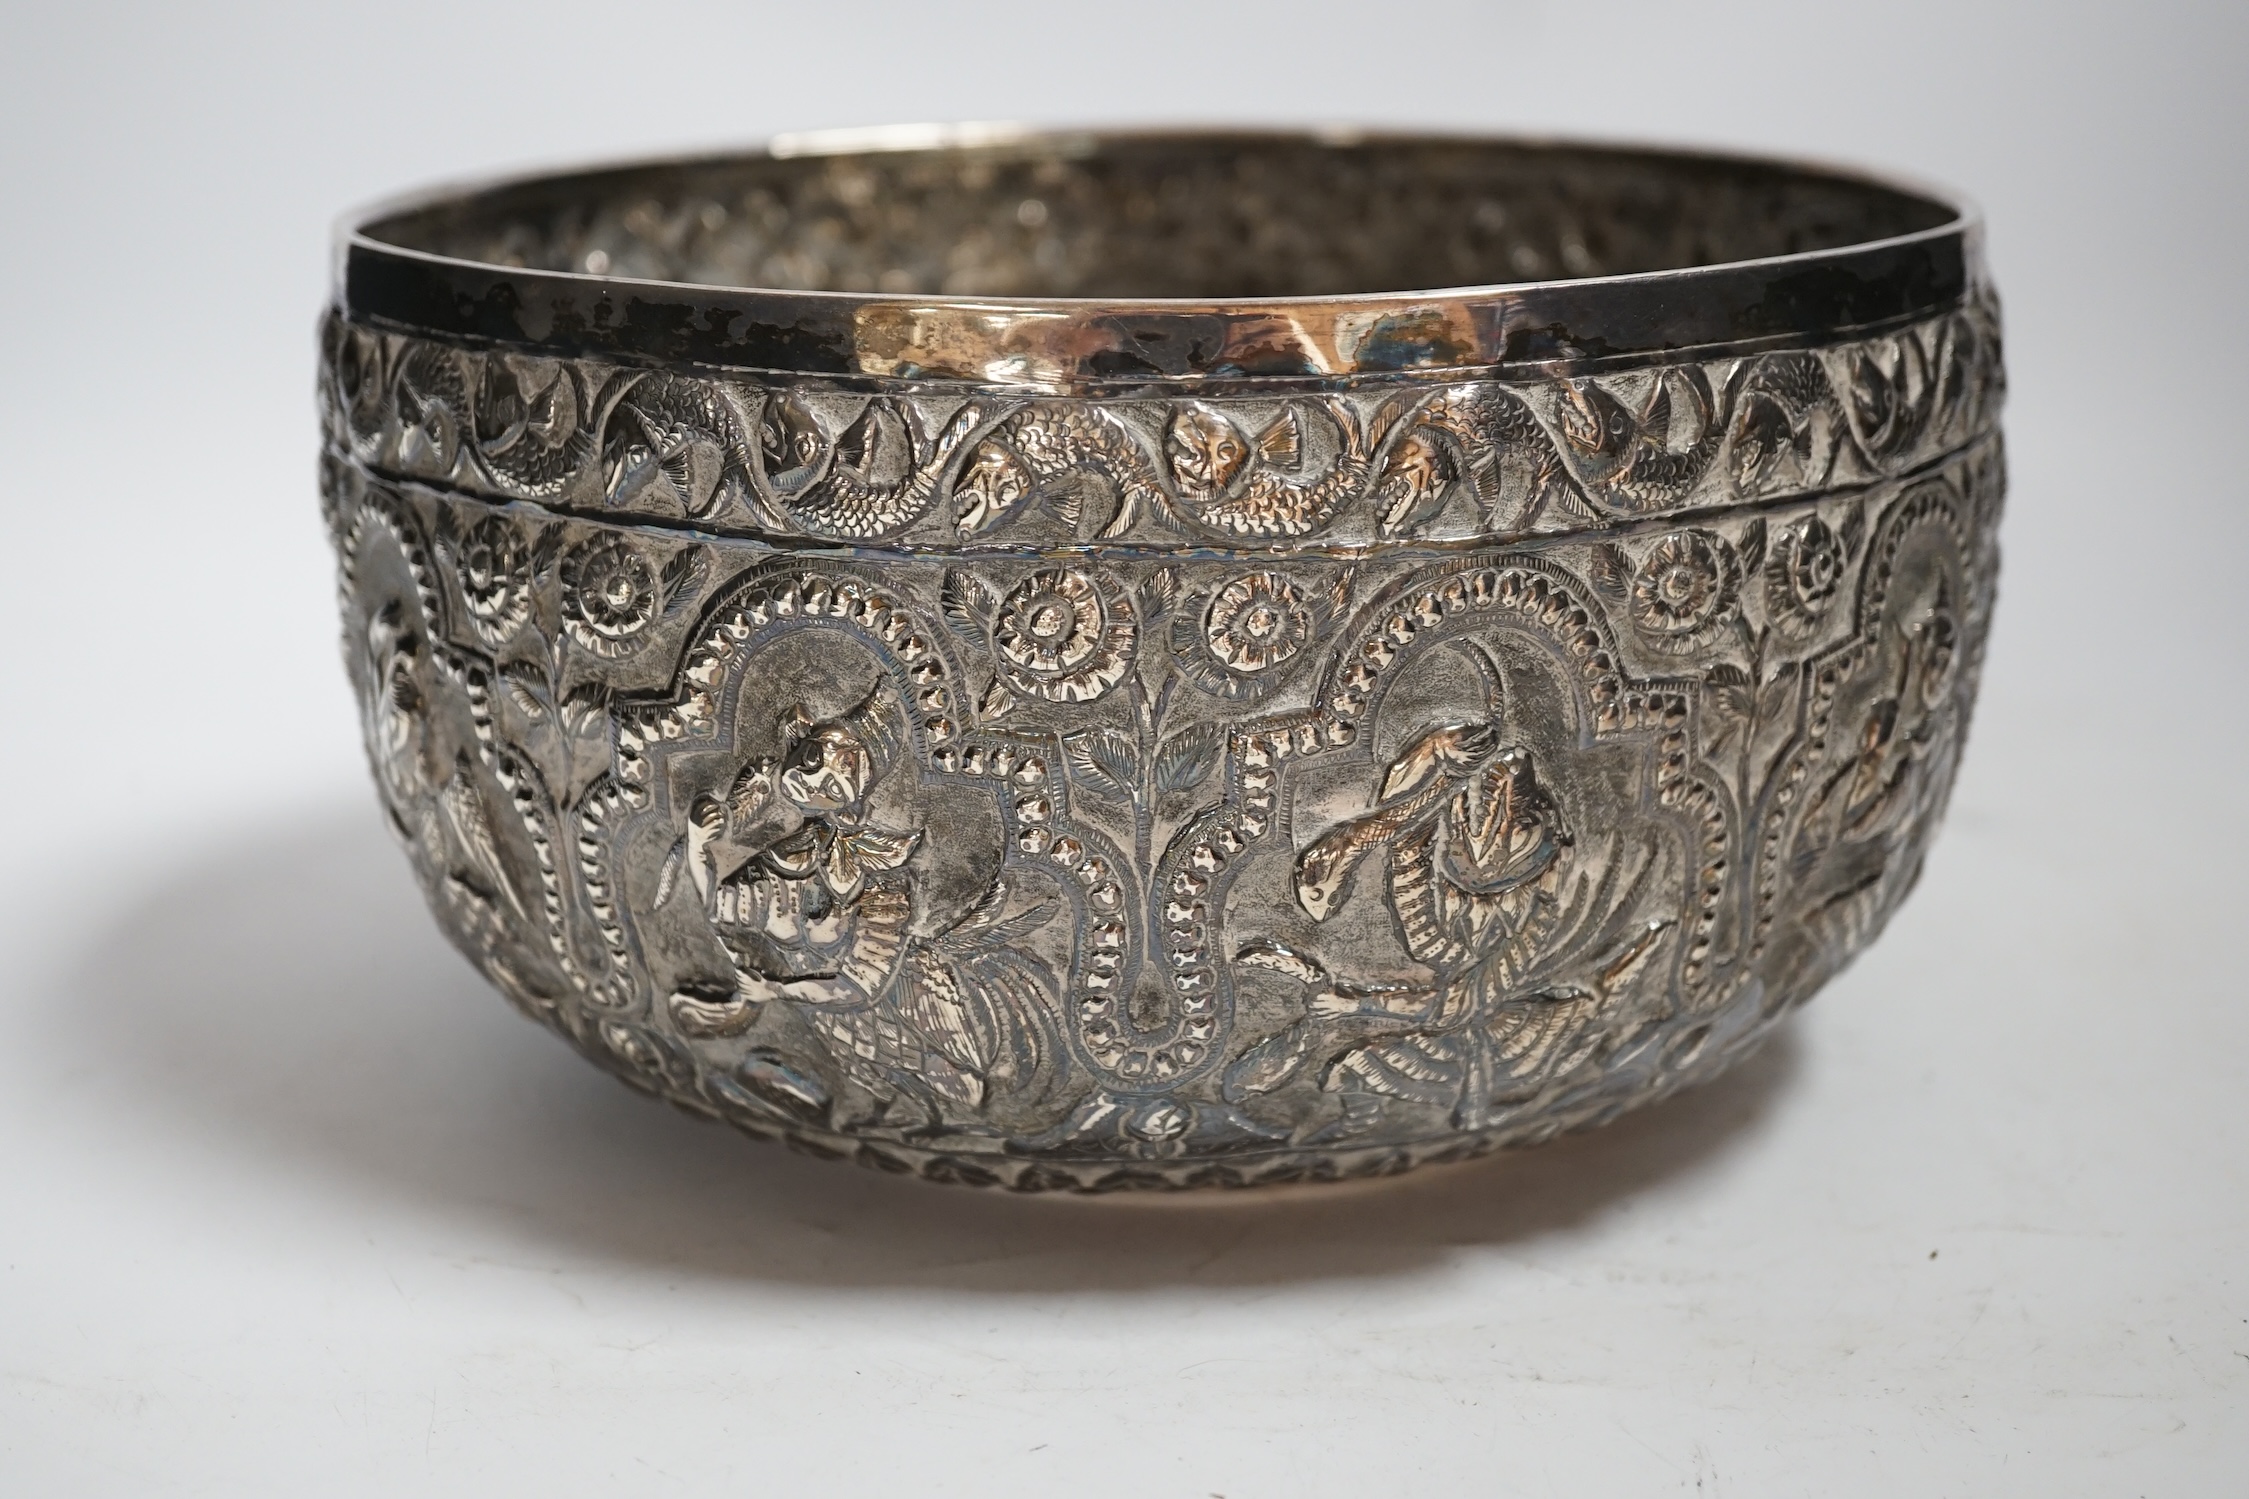 A 19th century Burmese embossed white metal bowl, decorated with figures and flowers, diameter 22.2cm, 22.9oz.